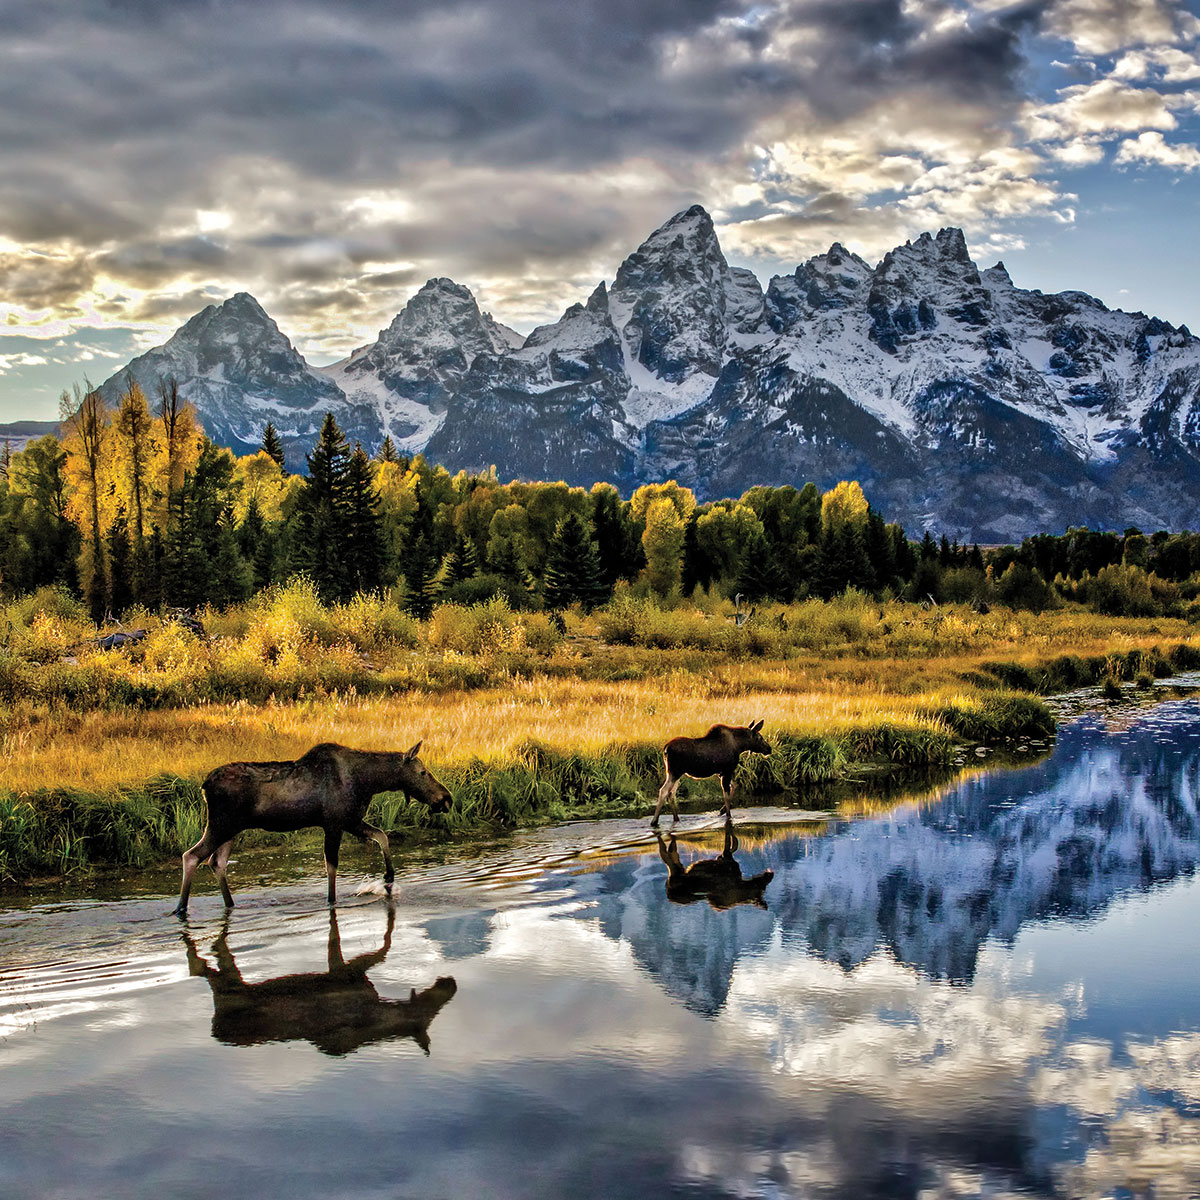 Moose and Calf on Grand Teton National Park Tour Out West - Backcountry Safaris